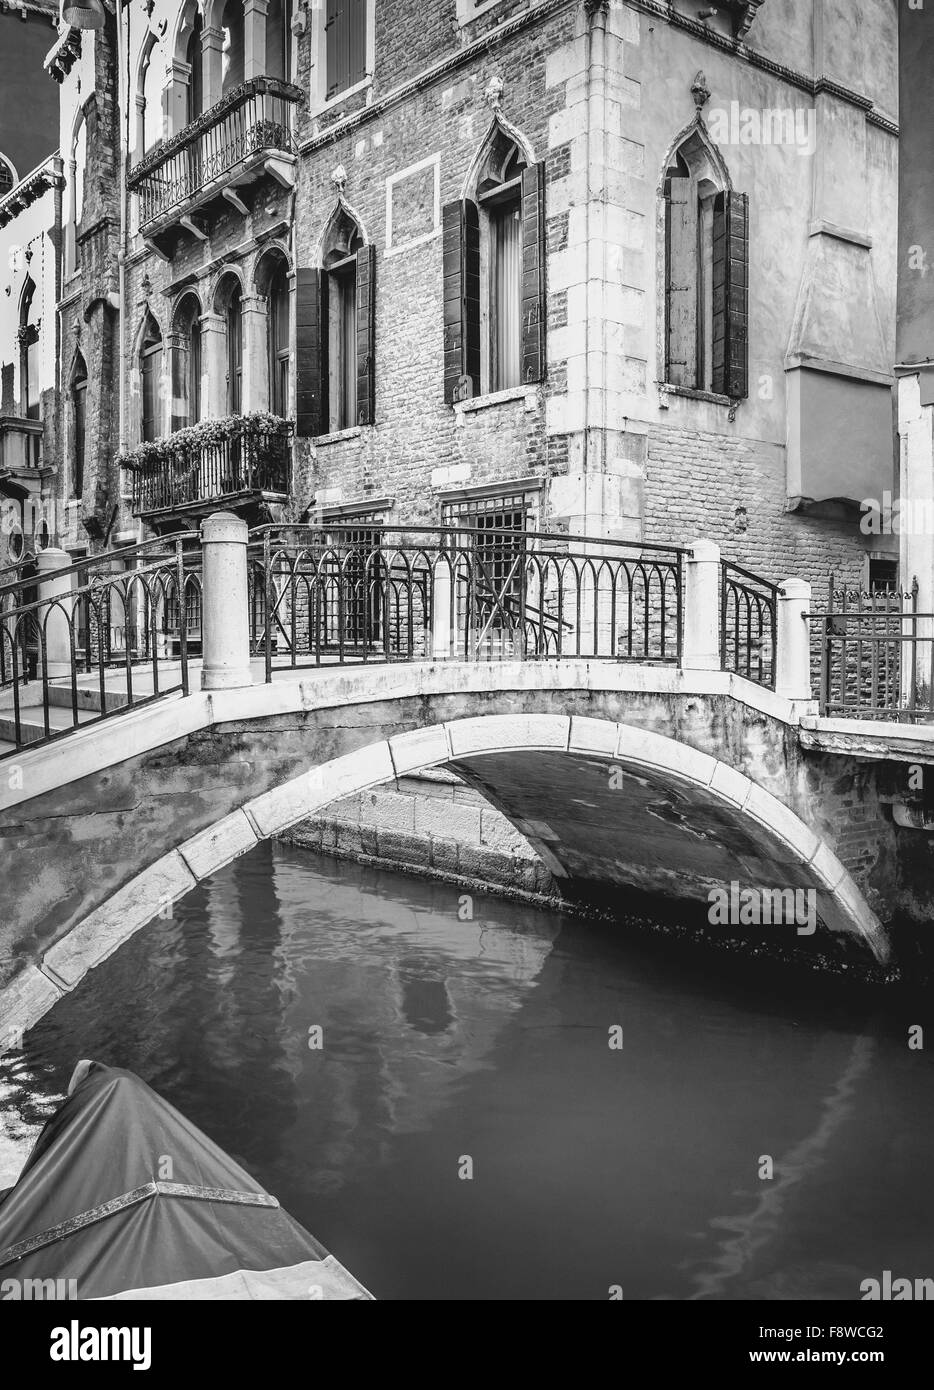 B&W scene from Venice with beautiful bridge in the foreground Stock Photo